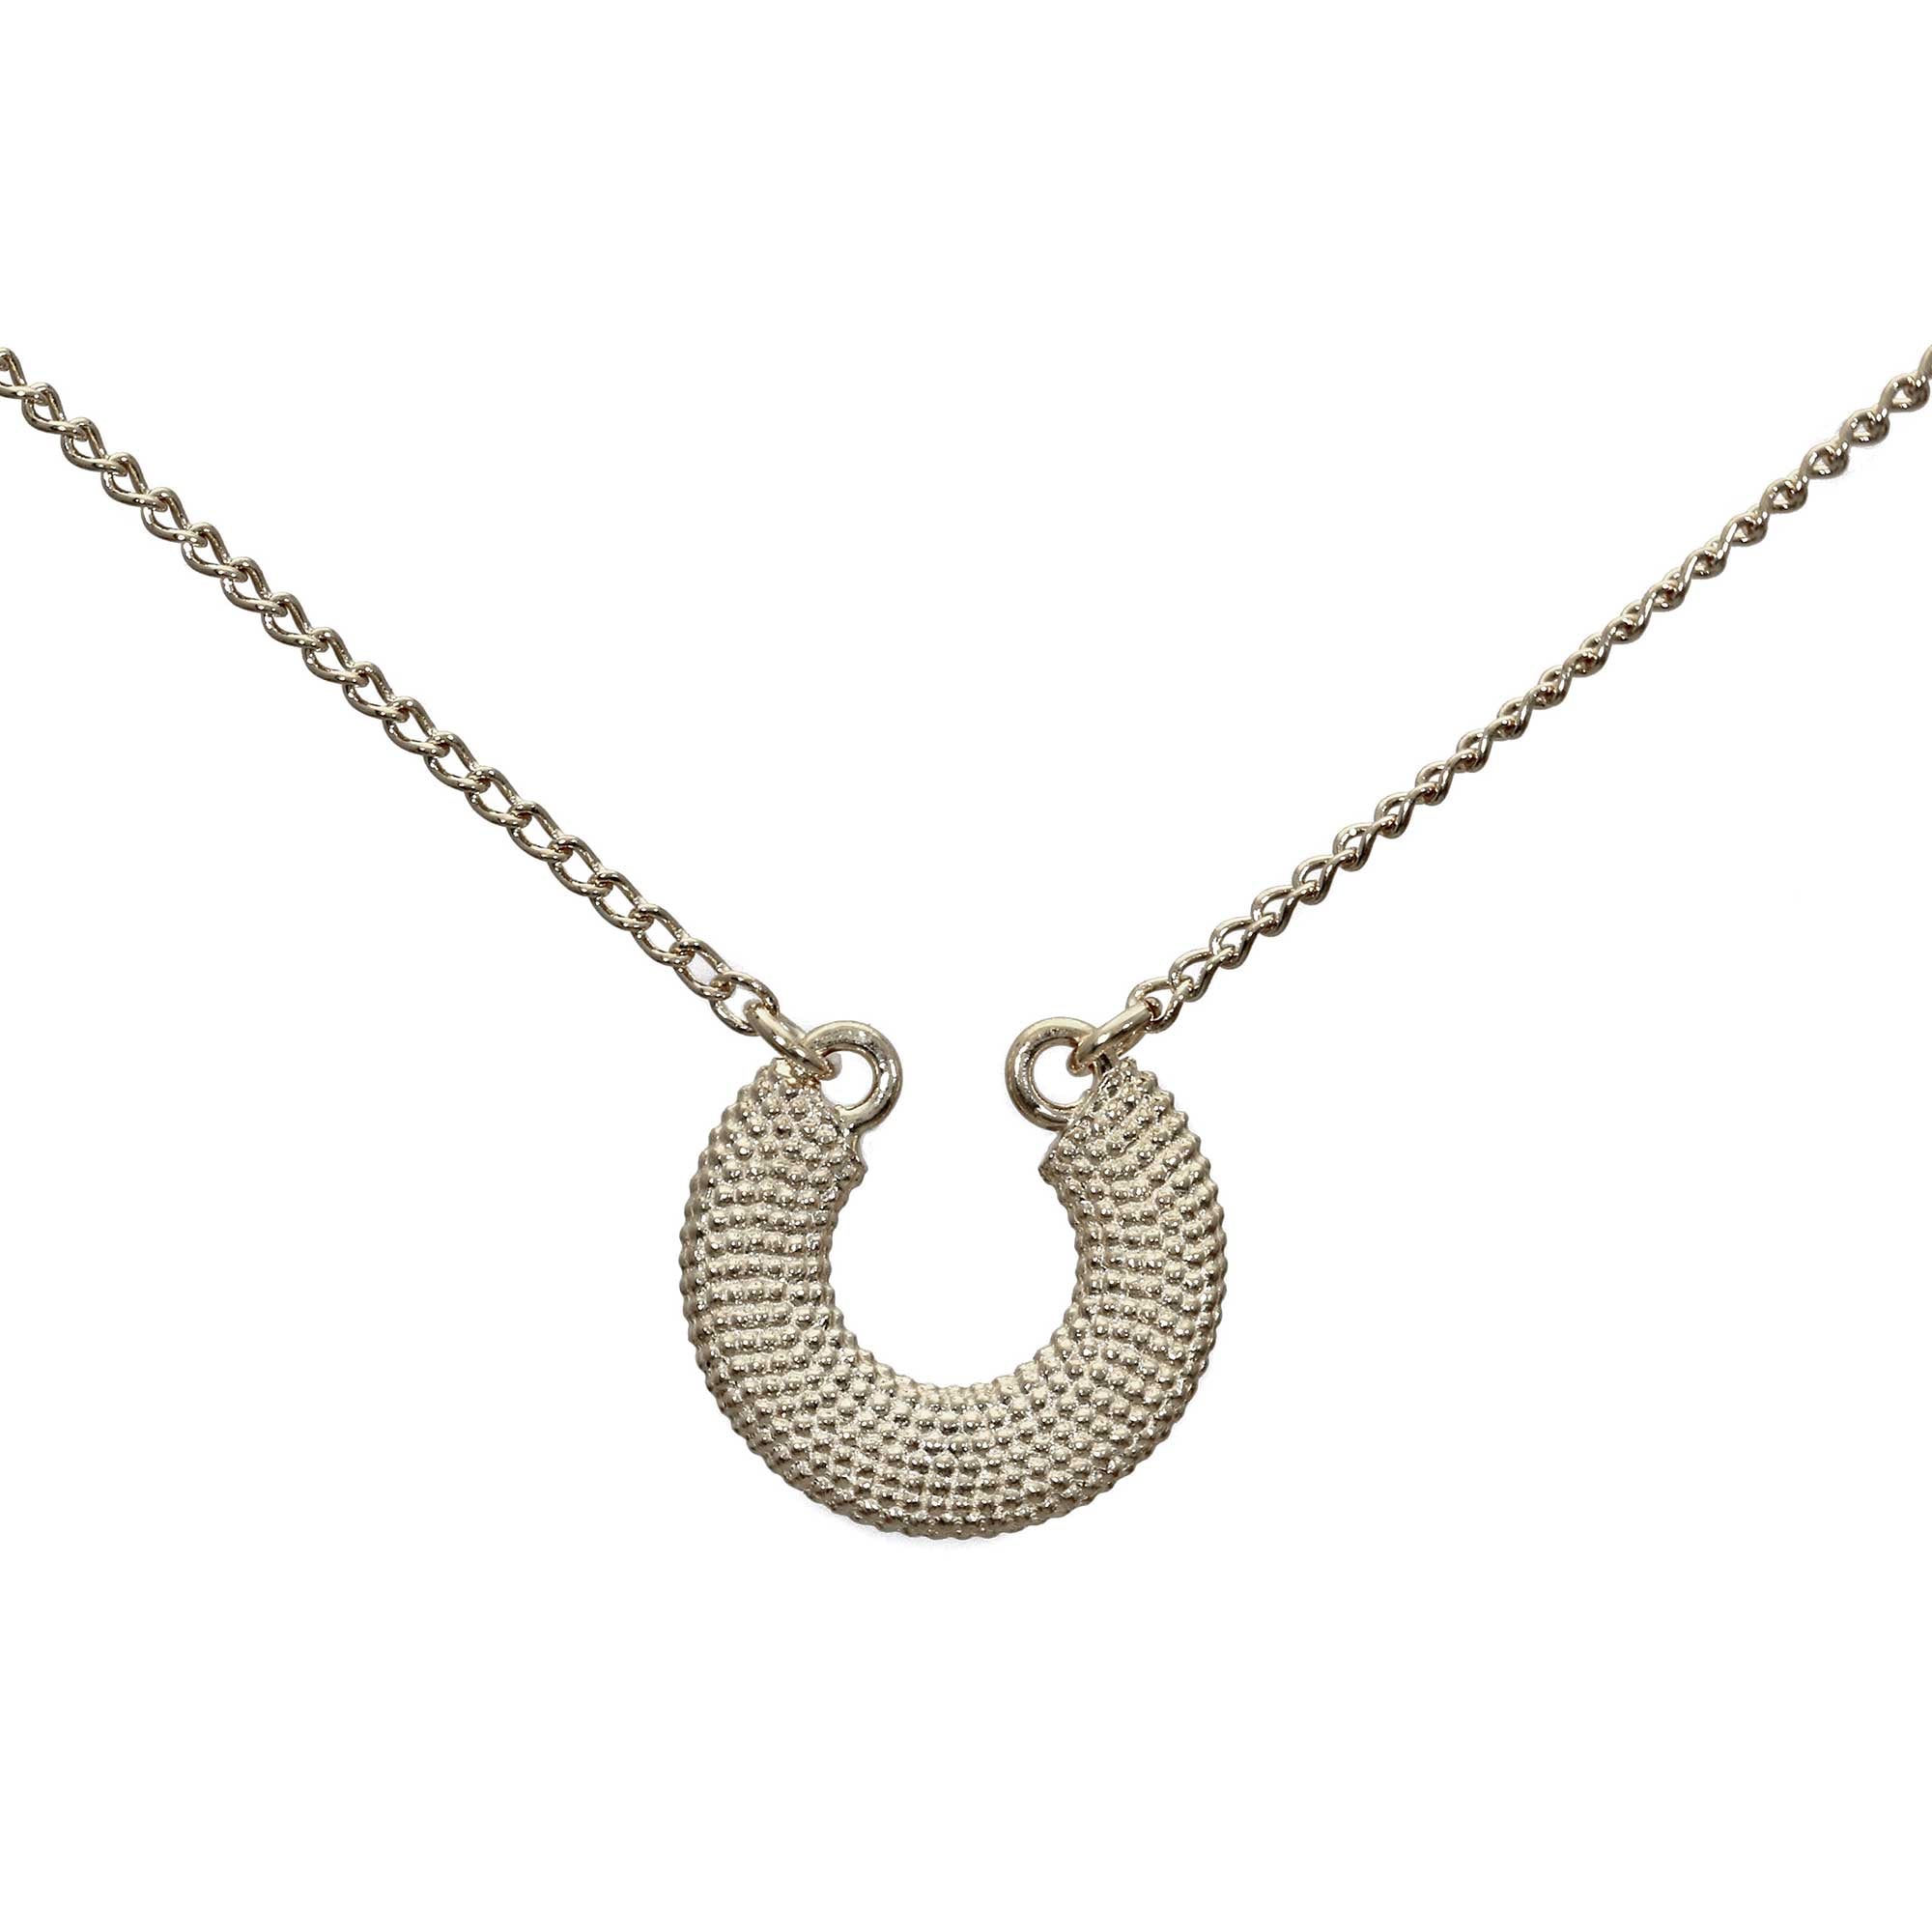 Weol textured sterling silver lucky horseshoe pendant necklace